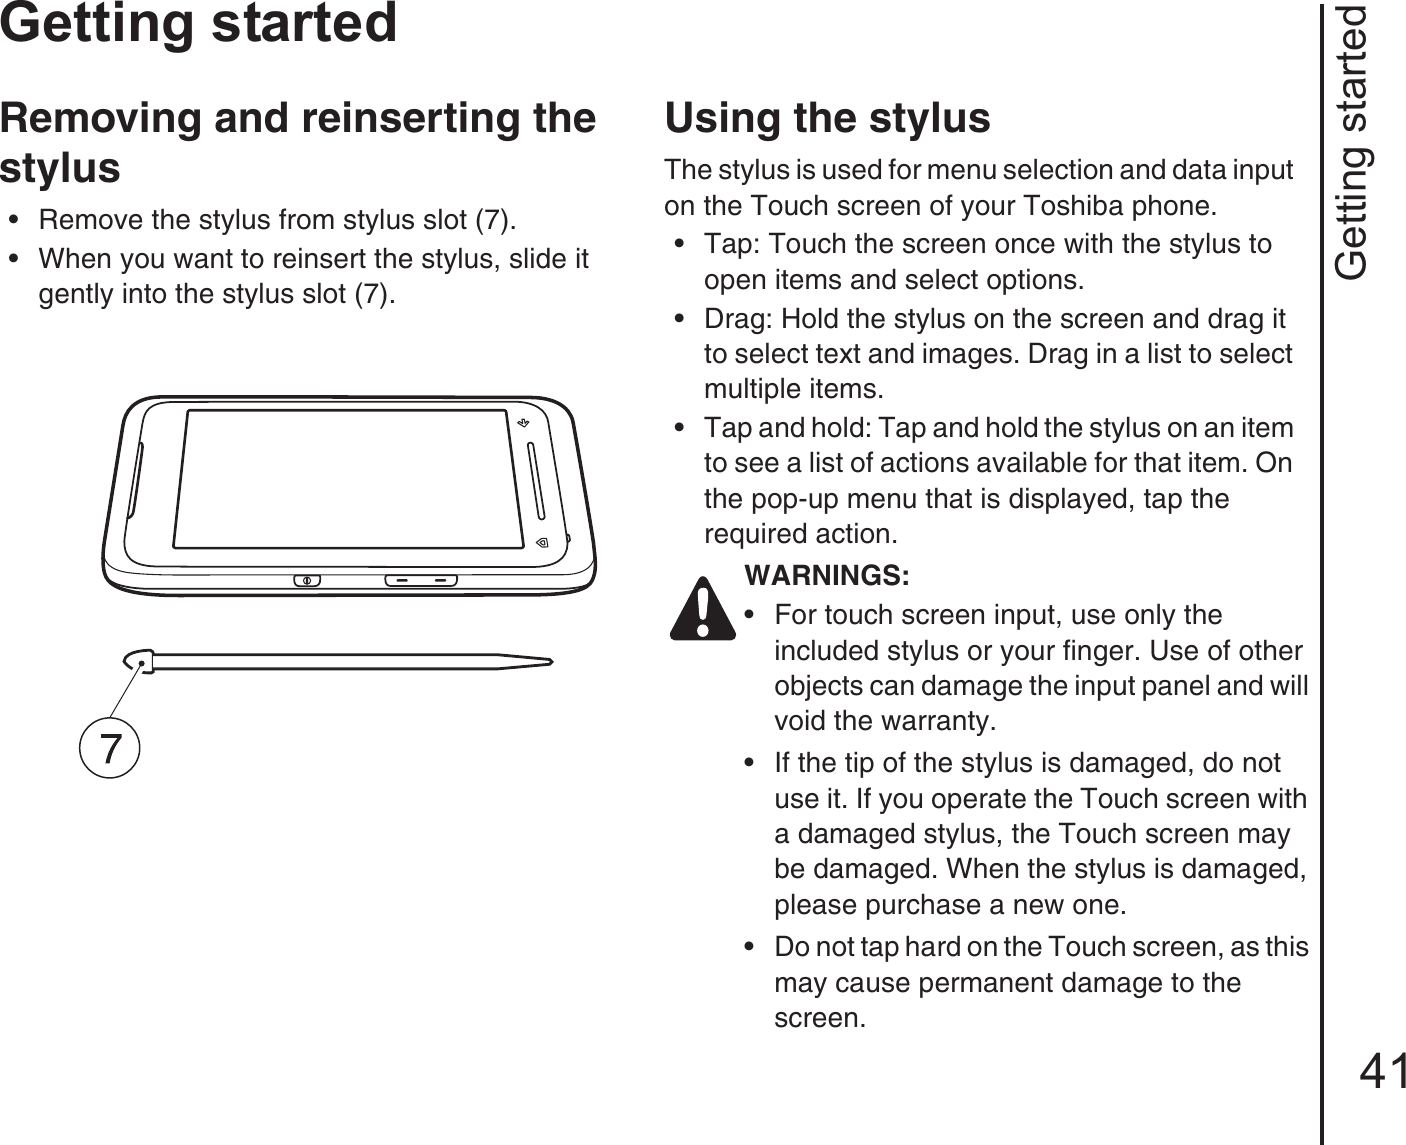 Getting started41Getting startedRemoving and reinserting the stylus• Remove the stylus from stylus slot (7). • When you want to reinsert the stylus, slide it gently into the stylus slot (7).Using the stylusThe stylus is used for menu selection and data input on the Touch screen of your Toshiba phone.• Tap: Touch the screen once with the stylus to open items and select options.• Drag: Hold the stylus on the screen and drag it to select text and images. Drag in a list to select multiple items.• Tap and hold: Tap and hold the stylus on an item to see a list of actions available for that item. On the pop-up menu that is displayed, tap the required action.WARNINGS:• For touch screen input, use only the included stylus or your finger. Use of other objects can damage the input panel and will void the warranty.• If the tip of the stylus is damaged, do not use it. If you operate the Touch screen with a damaged stylus, the Touch screen may be damaged. When the stylus is damaged, please purchase a new one.• Do not tap hard on the Touch screen, as this may cause permanent damage to the screen.